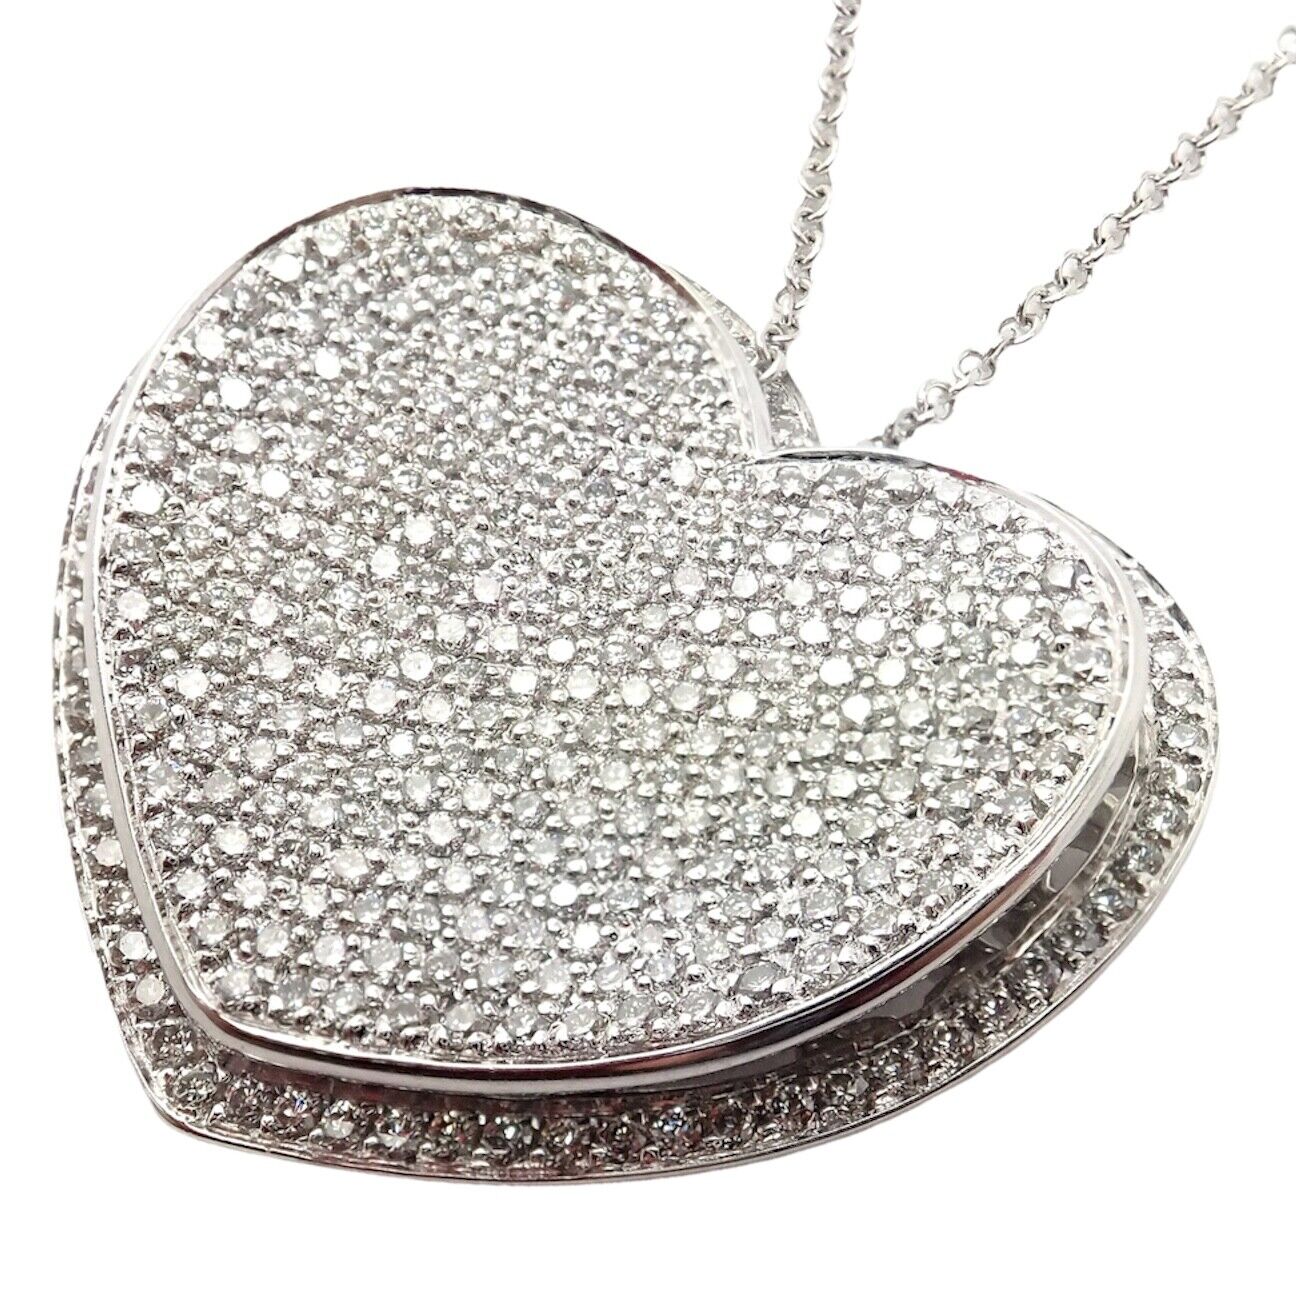 Pasquale Bruni Jewelry & Watches:Fine Jewelry:Necklaces & Pendants New! Authentic Pasquale Bruni 18k White Gold 2.02ct Pave Diamond Heart Necklace